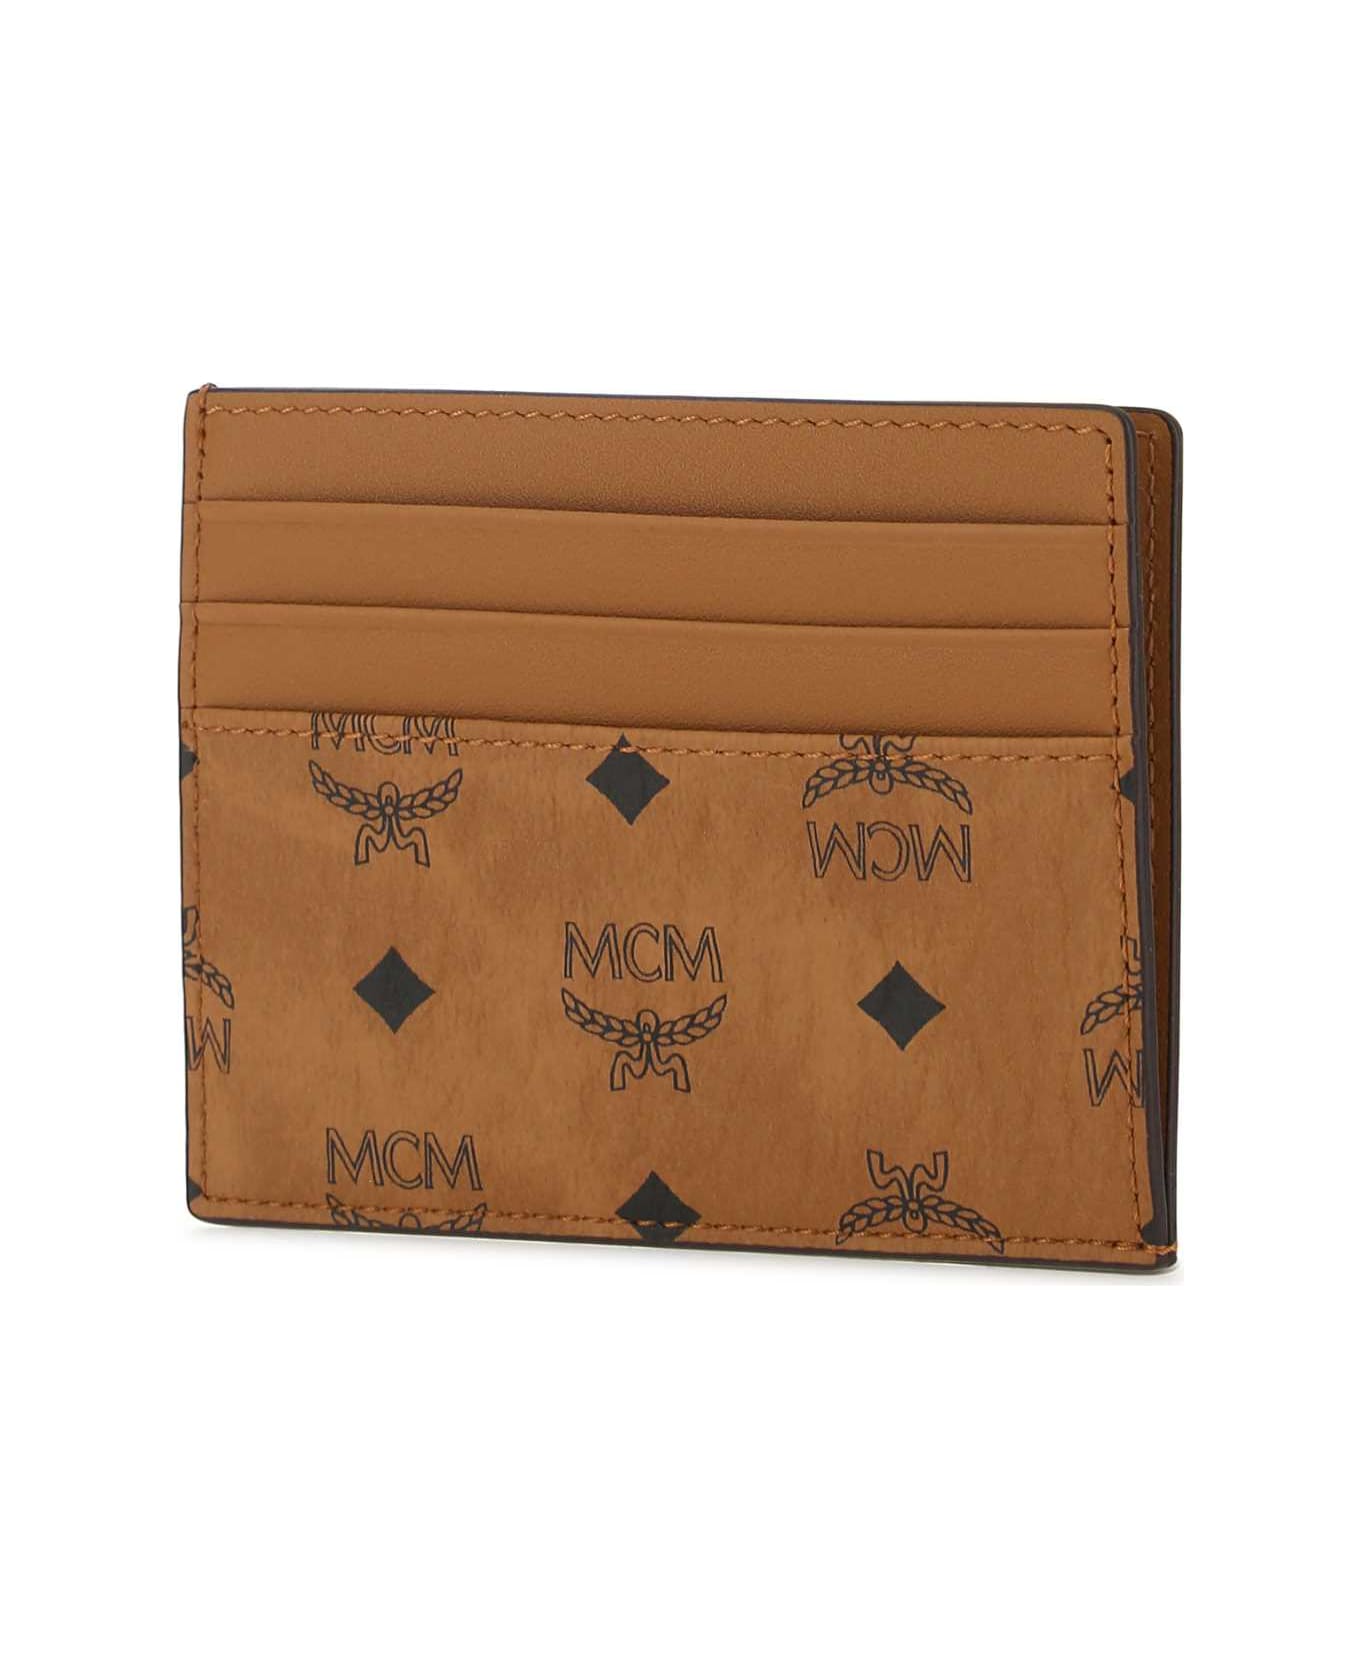 MCM Printed Leather Cardholder - CO